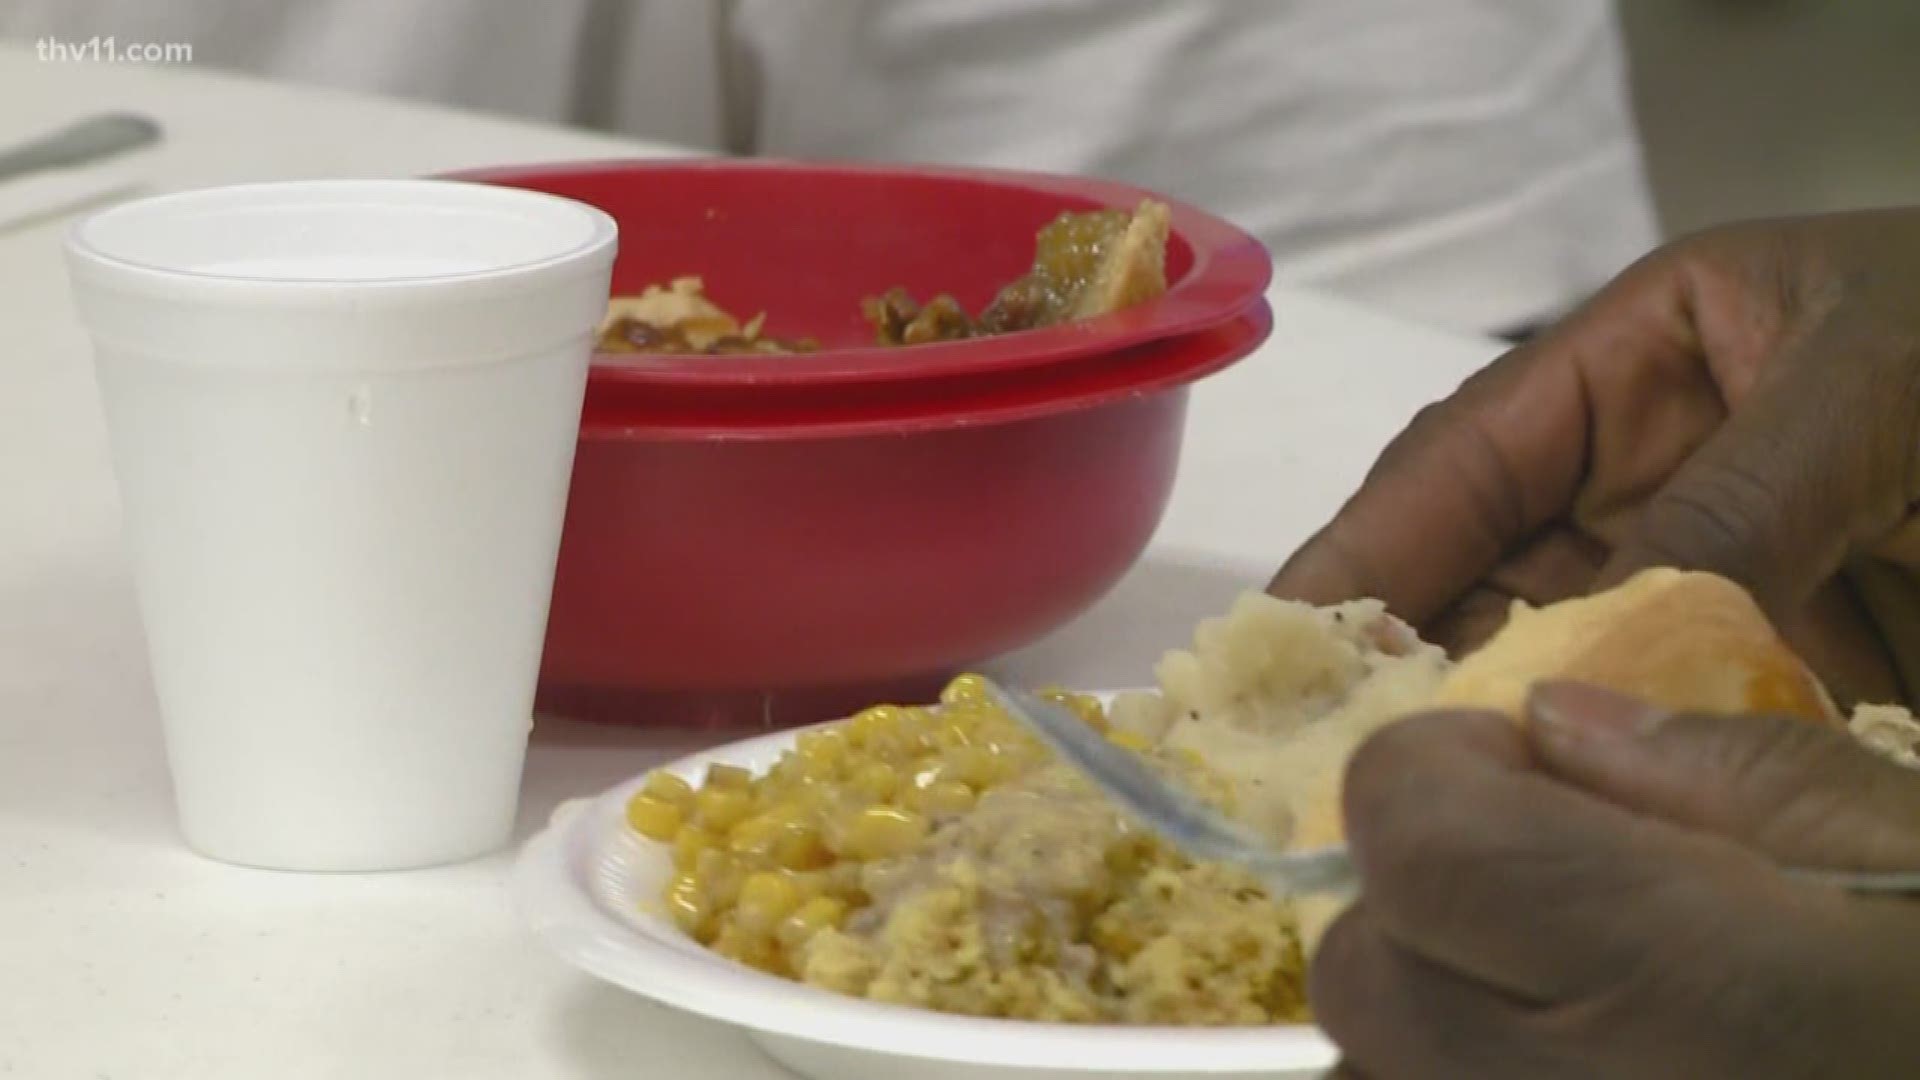 Several Little Rock organizations are setting tables for the homeless this Thanksgiving.